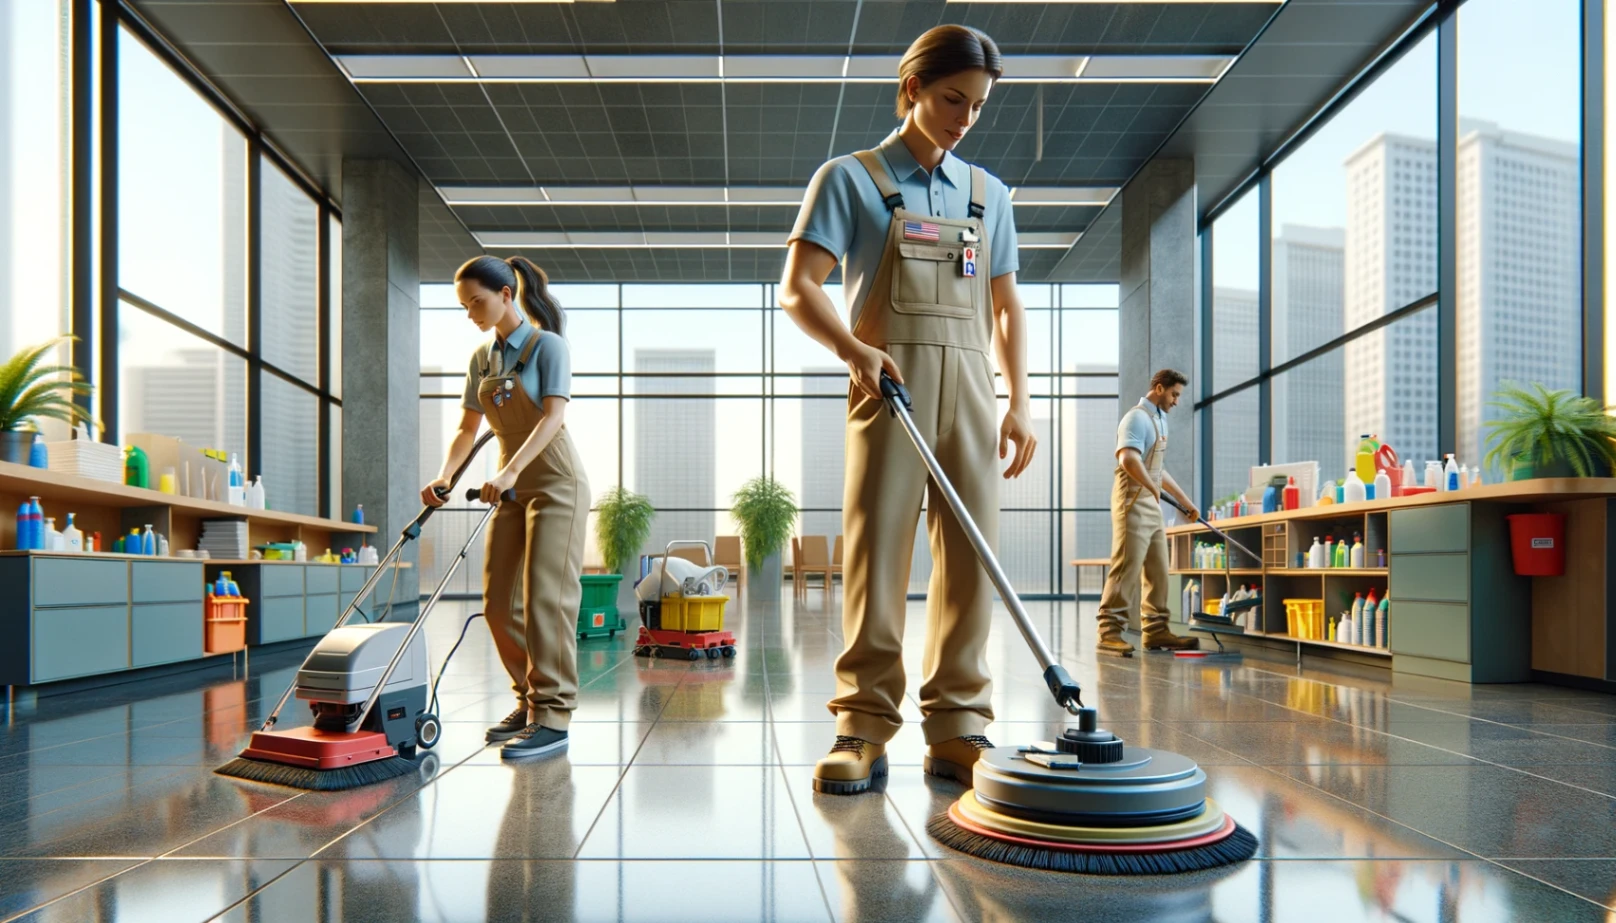 Janitorial Work: Earn Up to $18/Hour, No Experience Needed